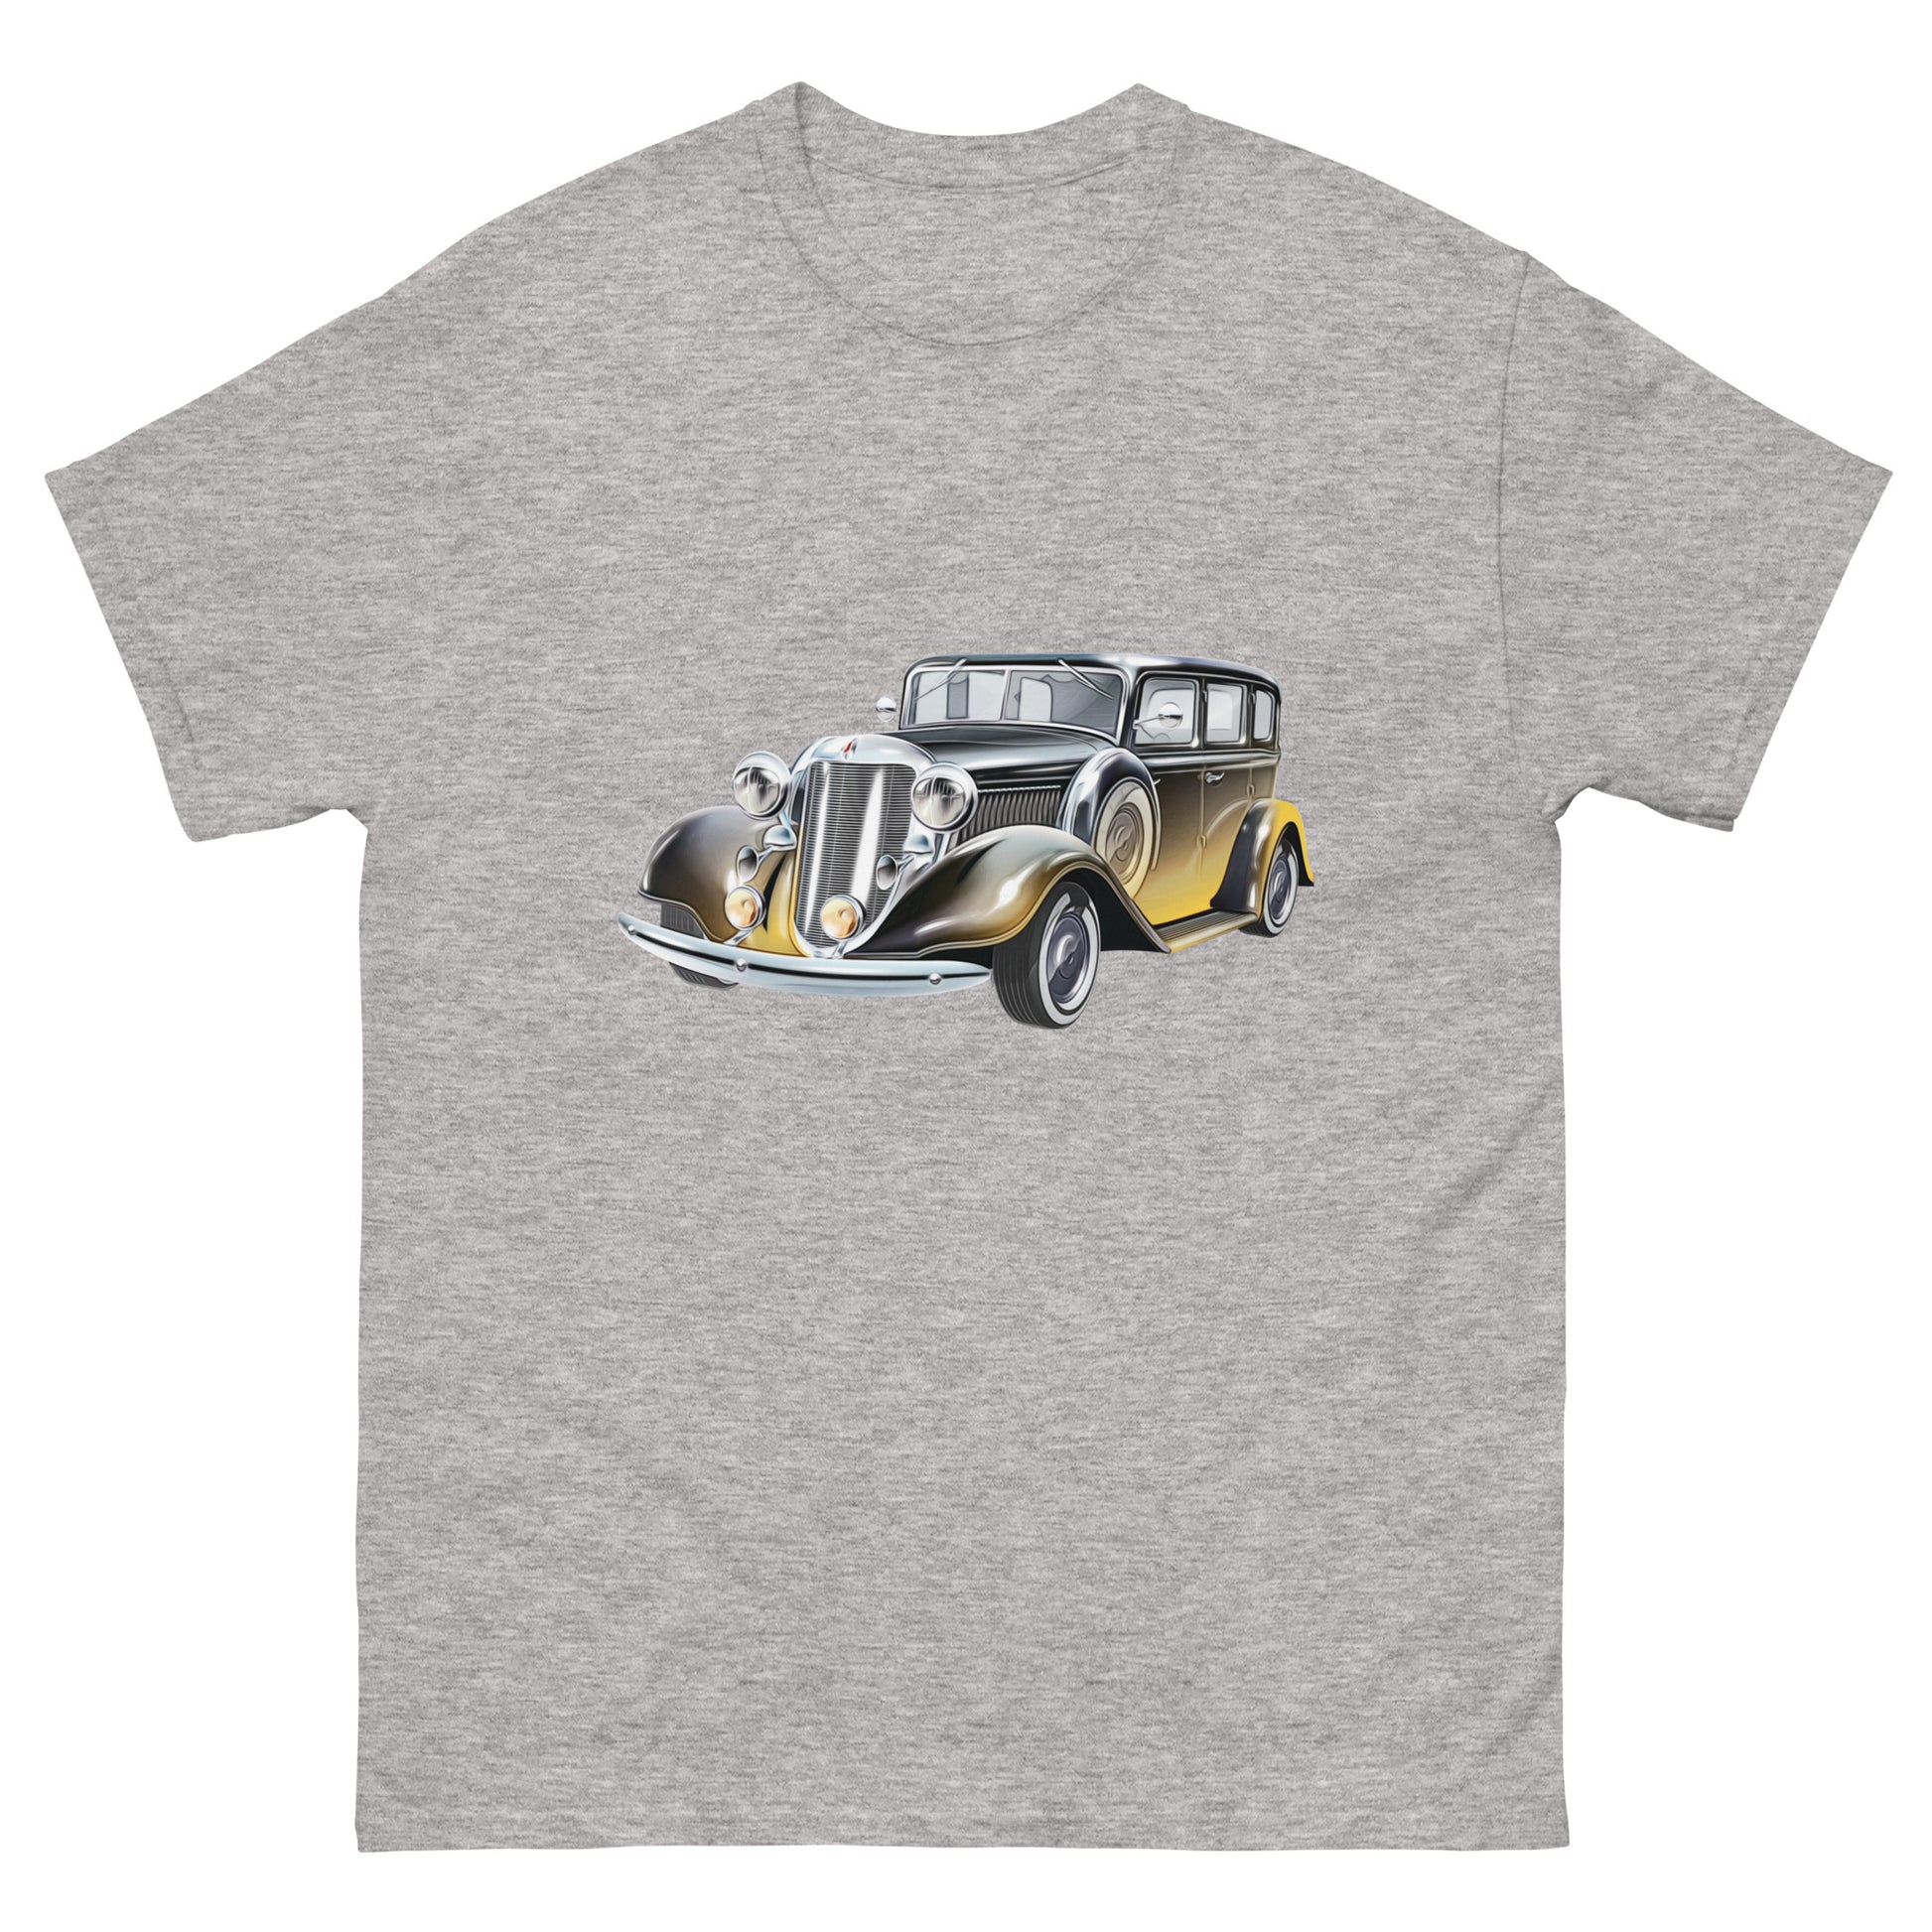 grey t-shirt with picture of vintage car